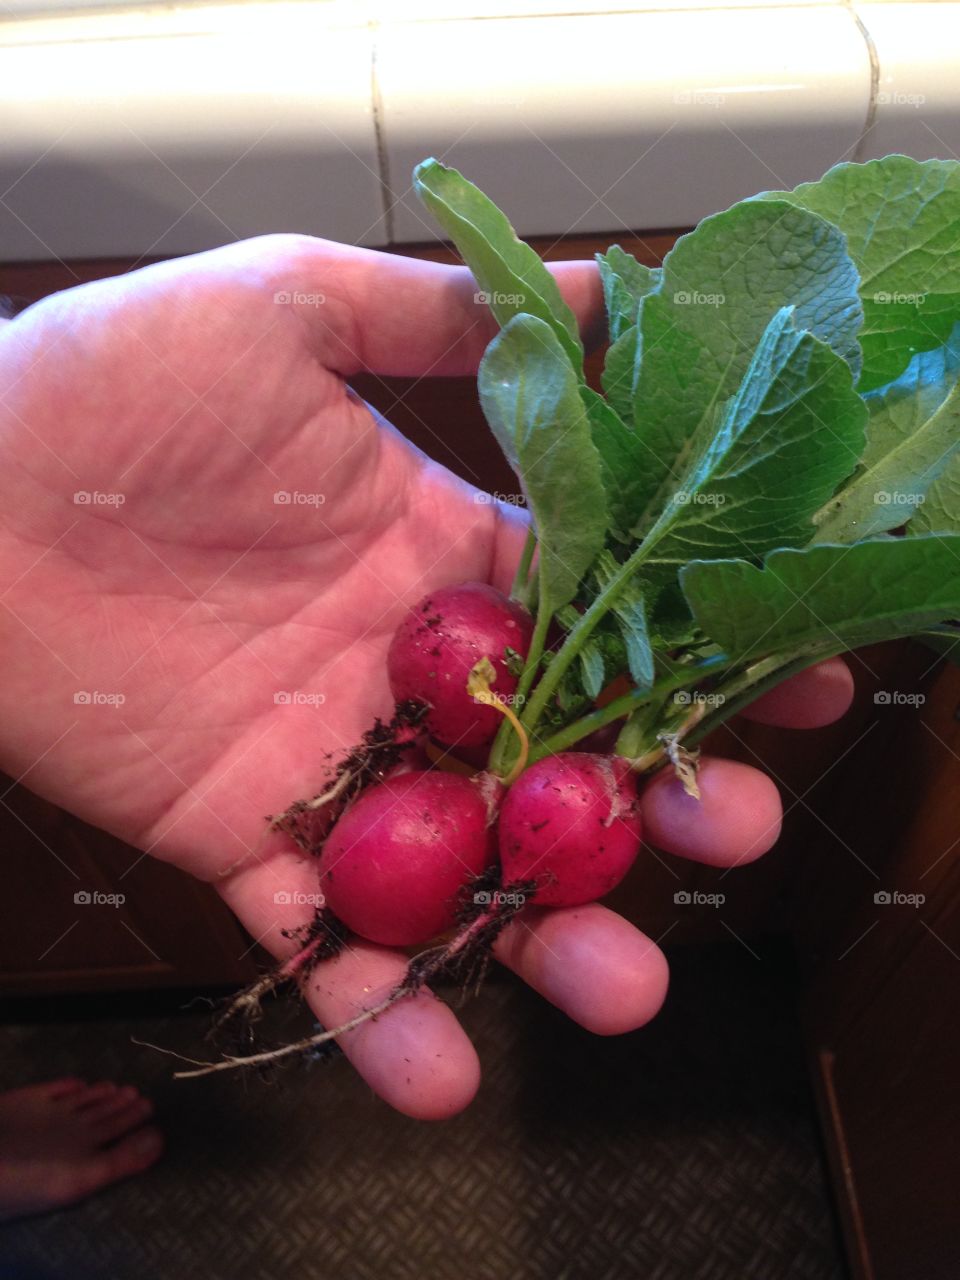 Radishes from the garden.